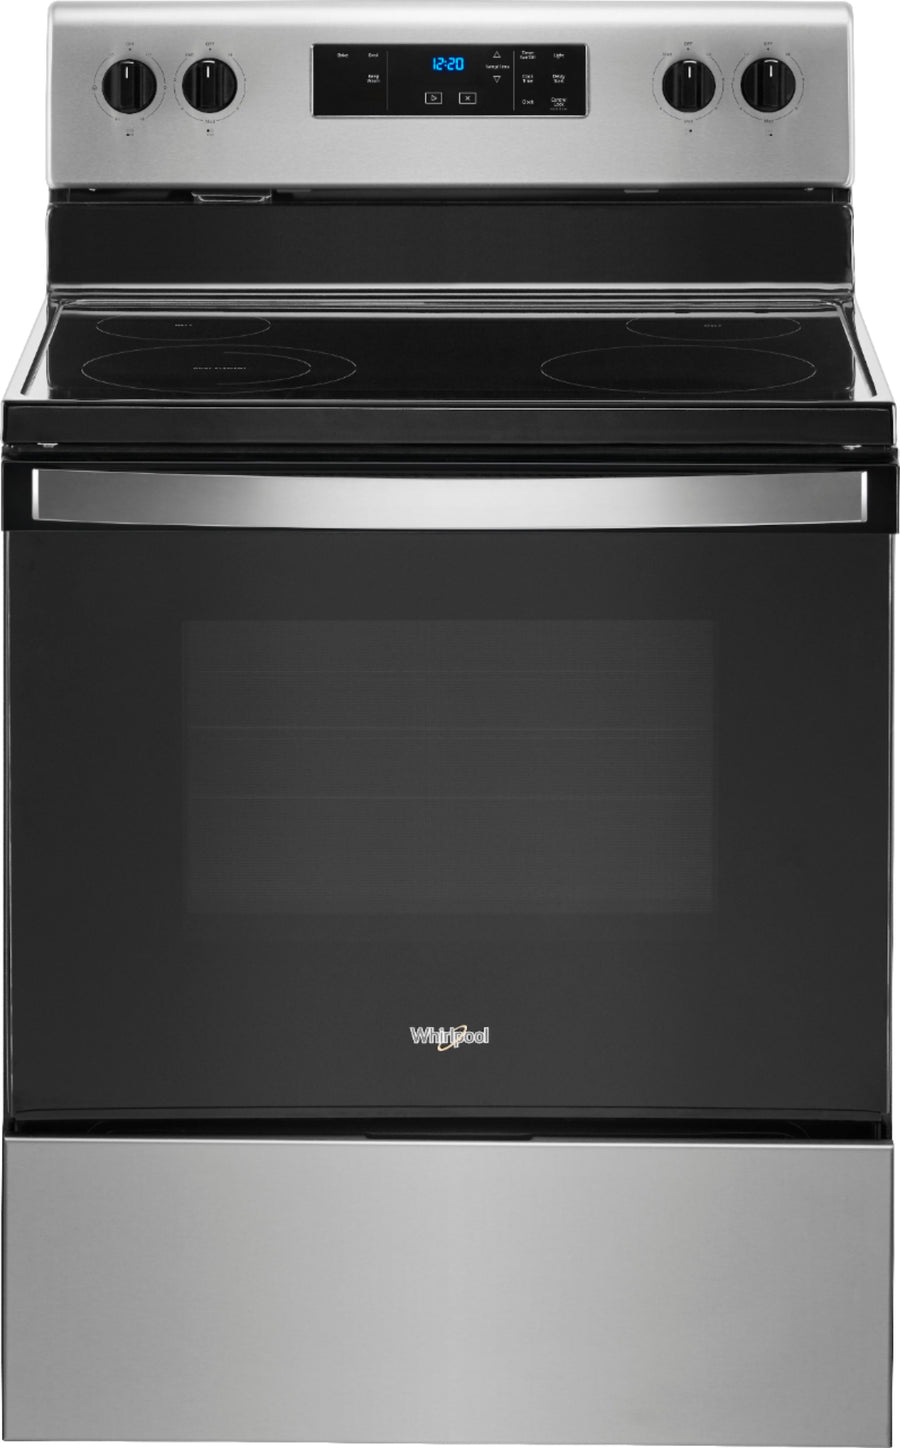 Whirlpool - 5.3 Cu. Ft. Freestanding Electric Range with Keep Warm Setting - Stainless steel_0